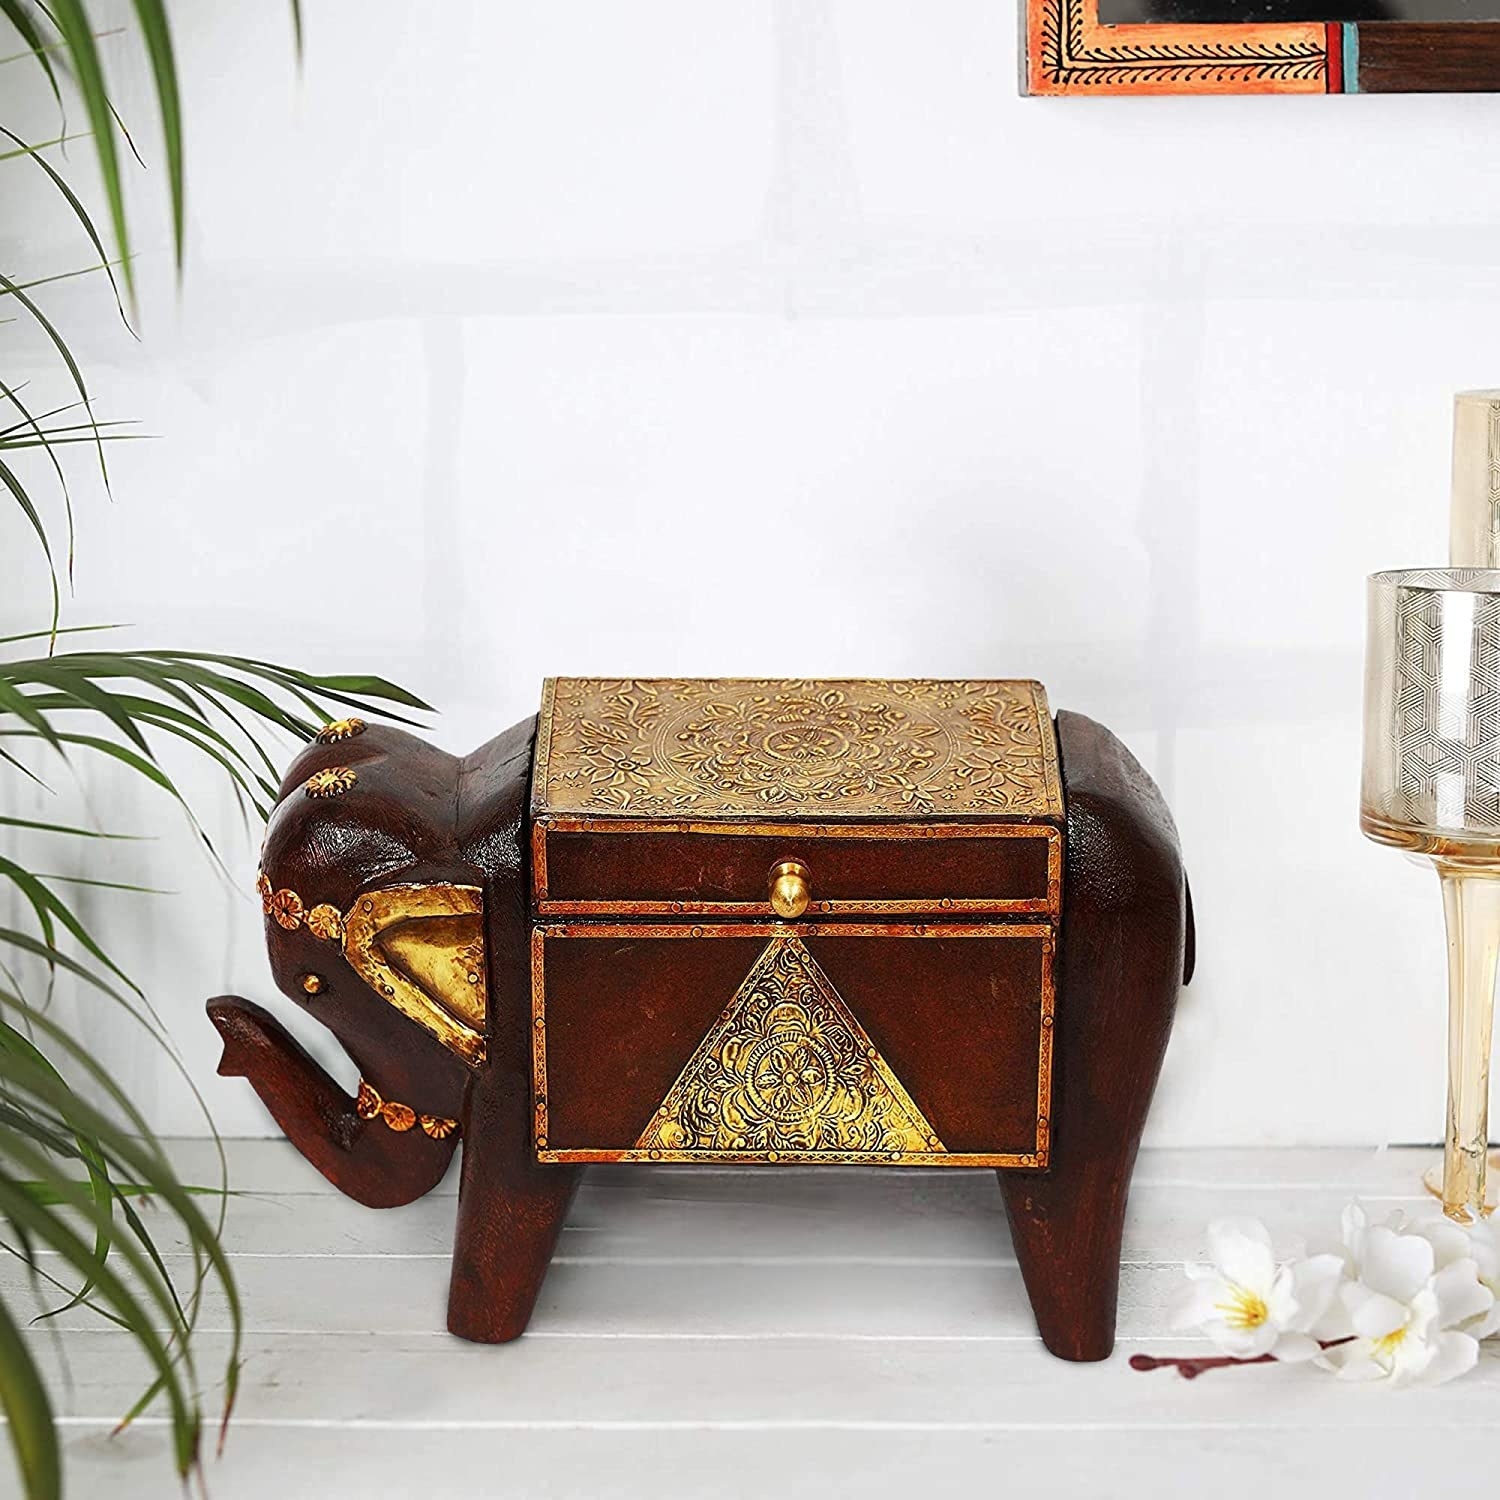 A dark brown and gold elephant -shaped storage box